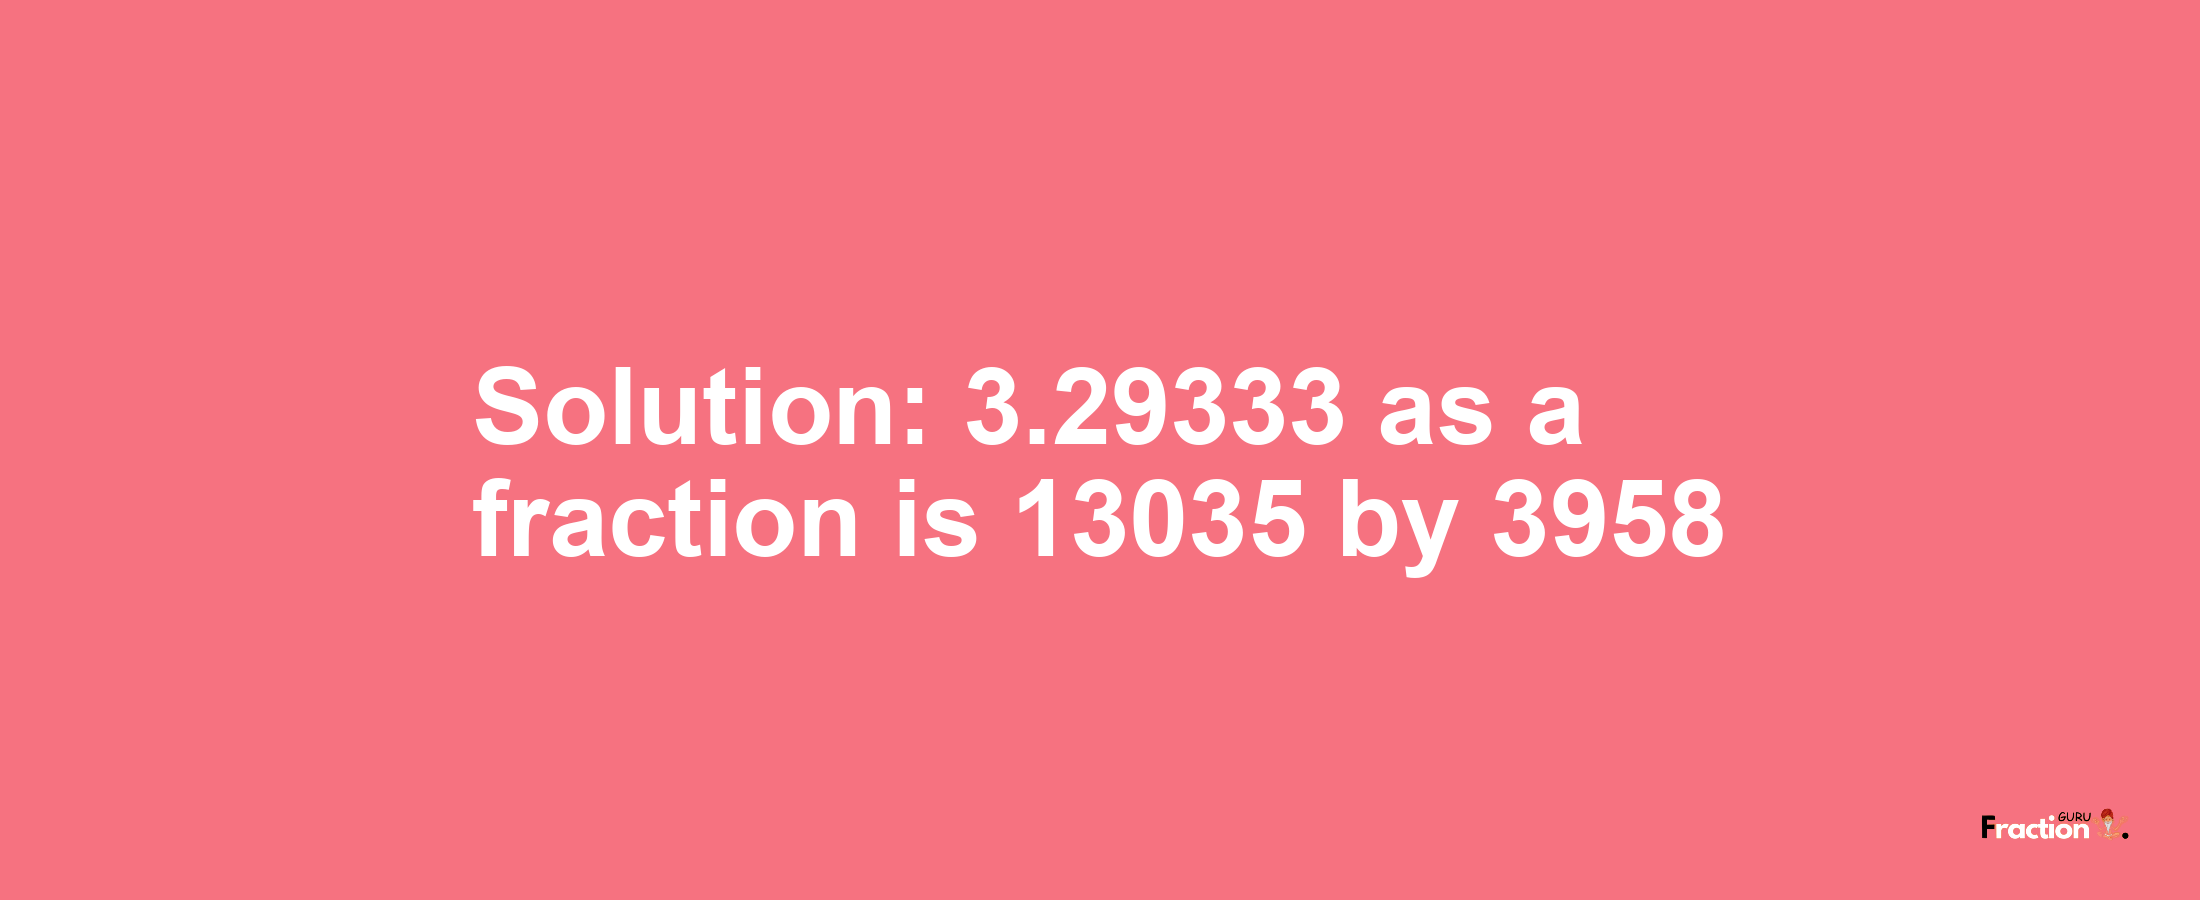 Solution:3.29333 as a fraction is 13035/3958